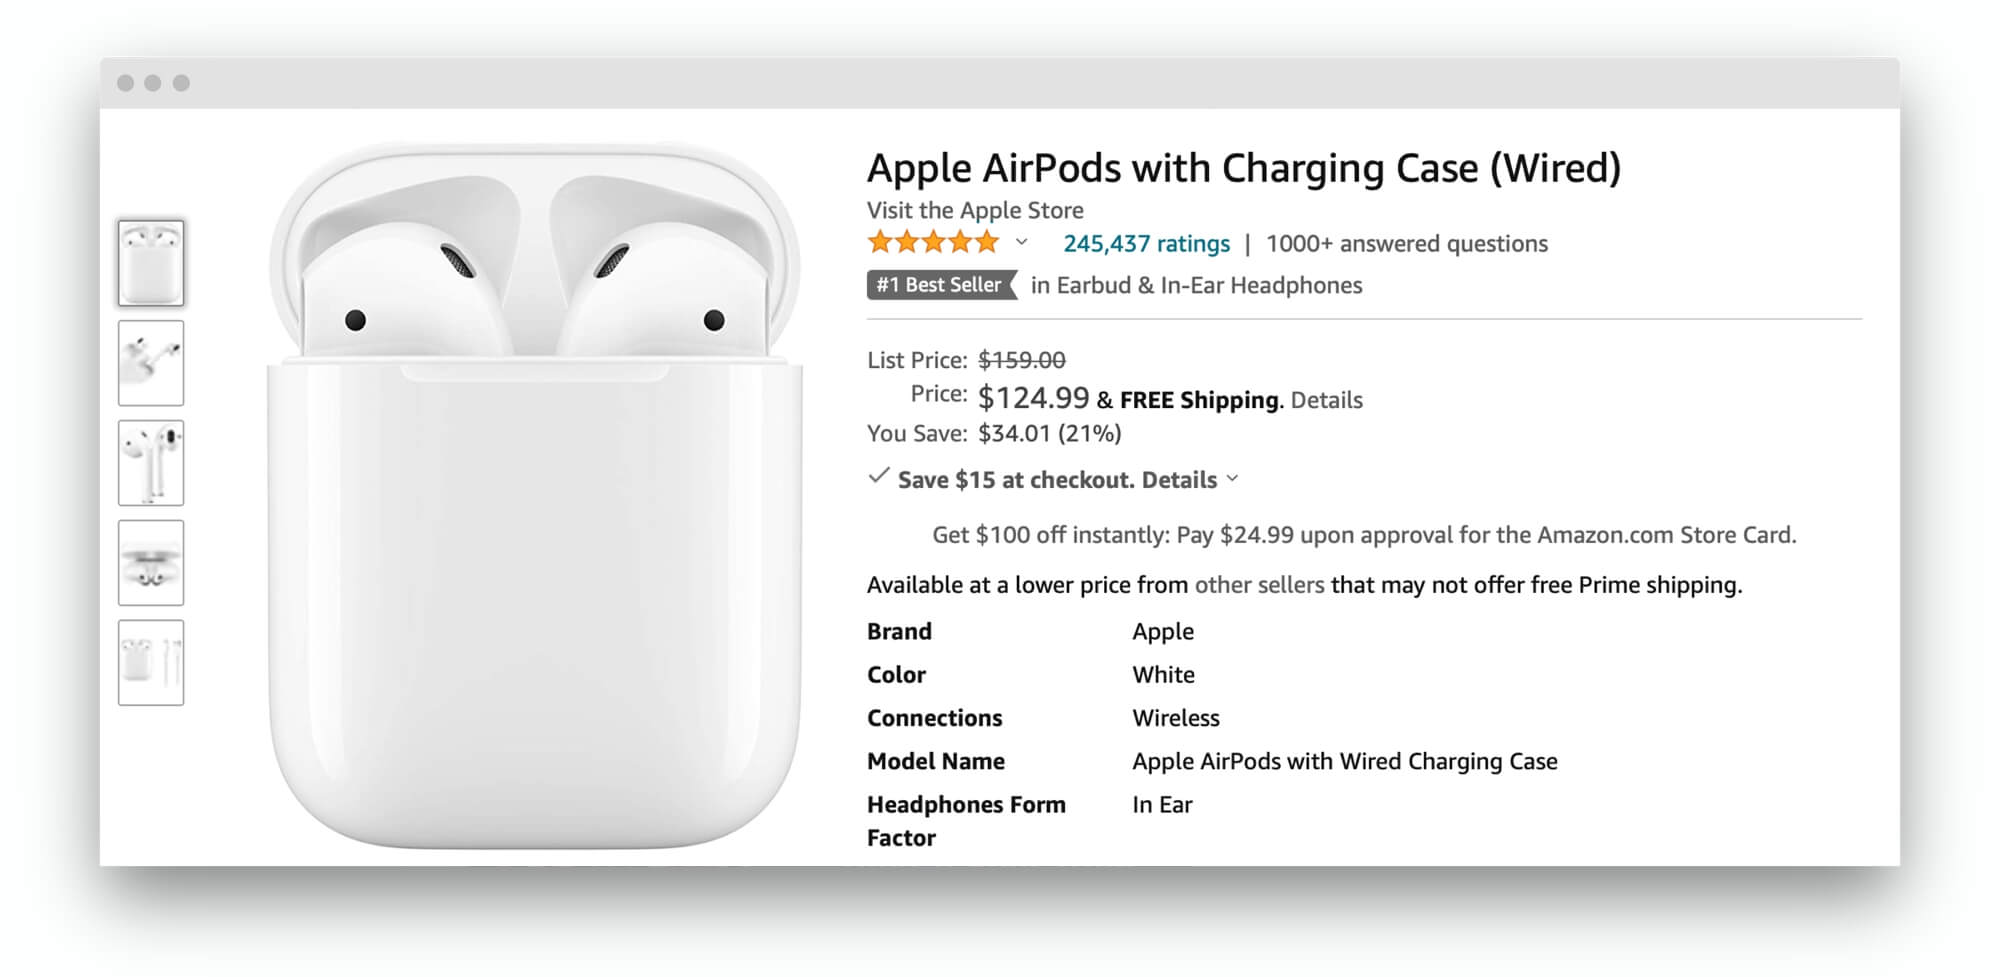 Apple AirPods have a 4.8 out of 5 rating based on 245,000 global ratings